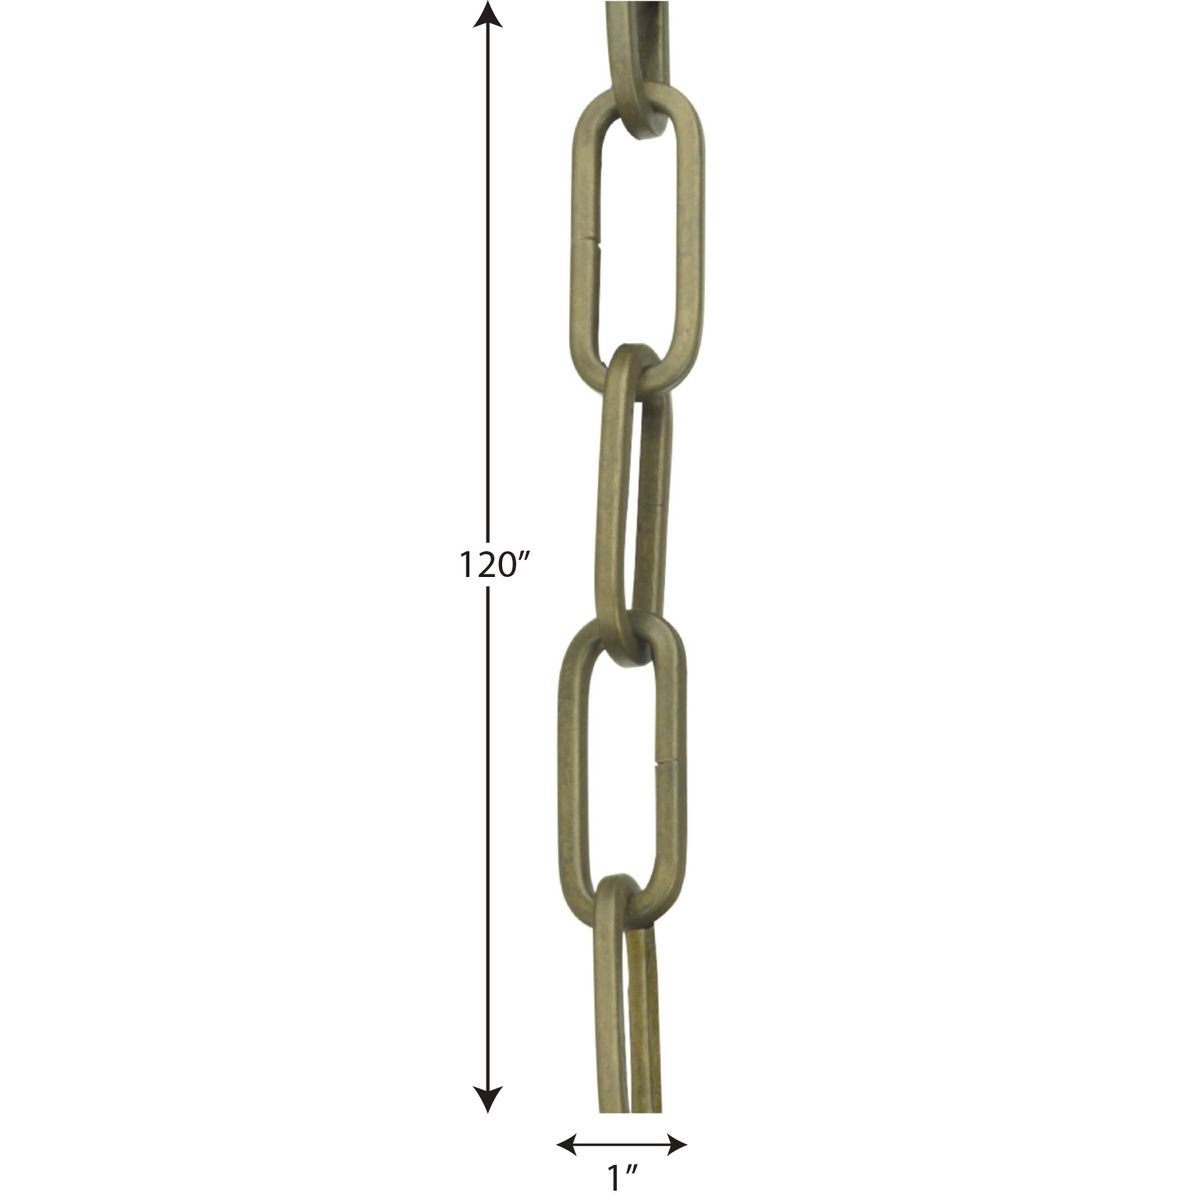 Accessory Chain - 10' of 9 Gauge Chain in Gilded Iron, P8757-71